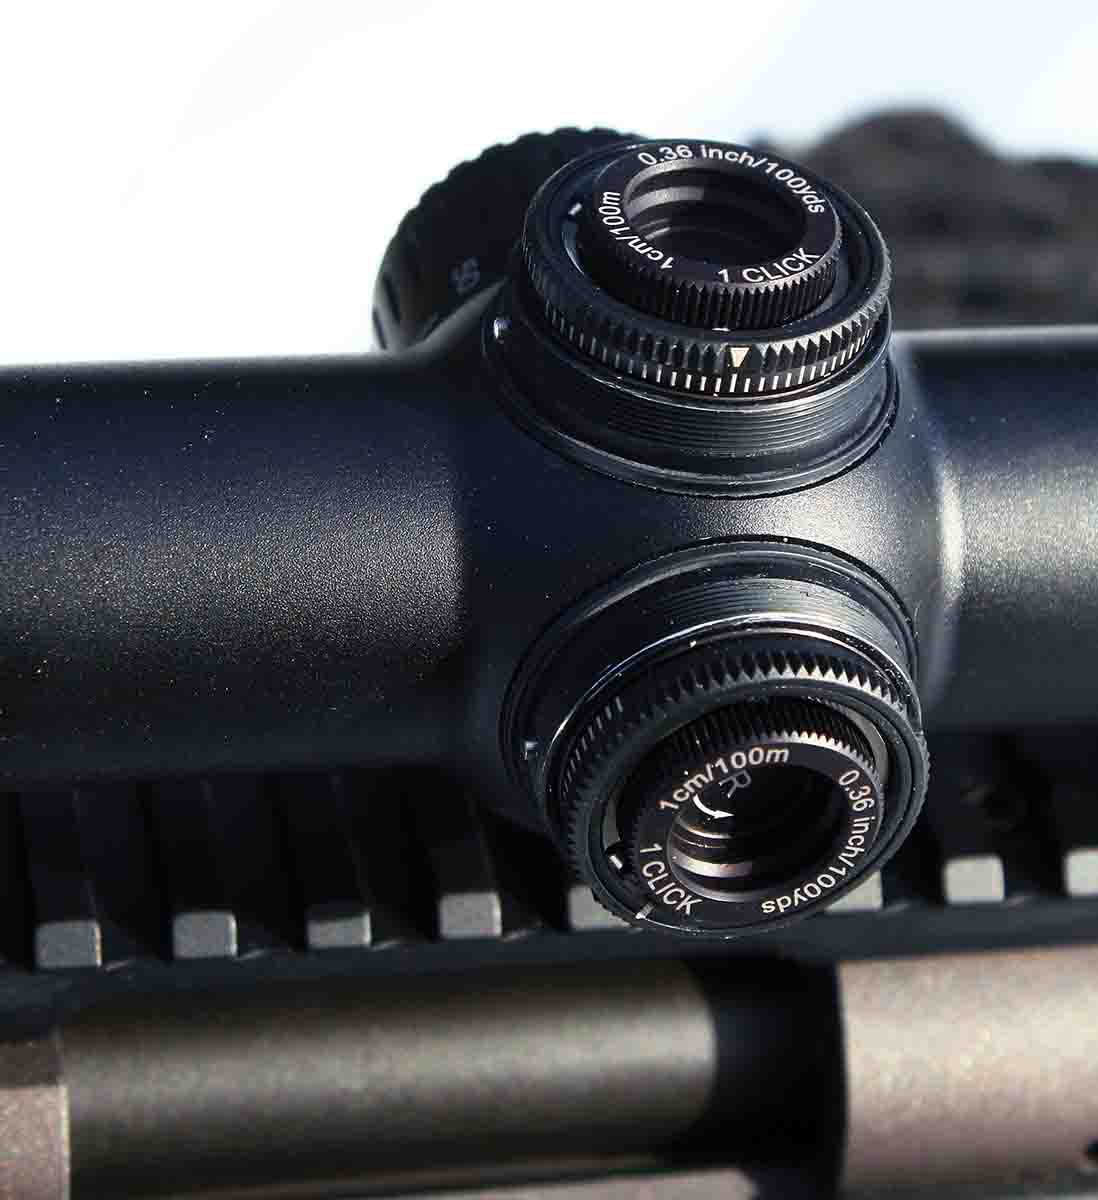 Swarovski’s Z8i series rifle scopes include 1 MIL elevation/windage adjustments. This translates into .36 inch at 100 yards or 1 centimeter at 100 meters.